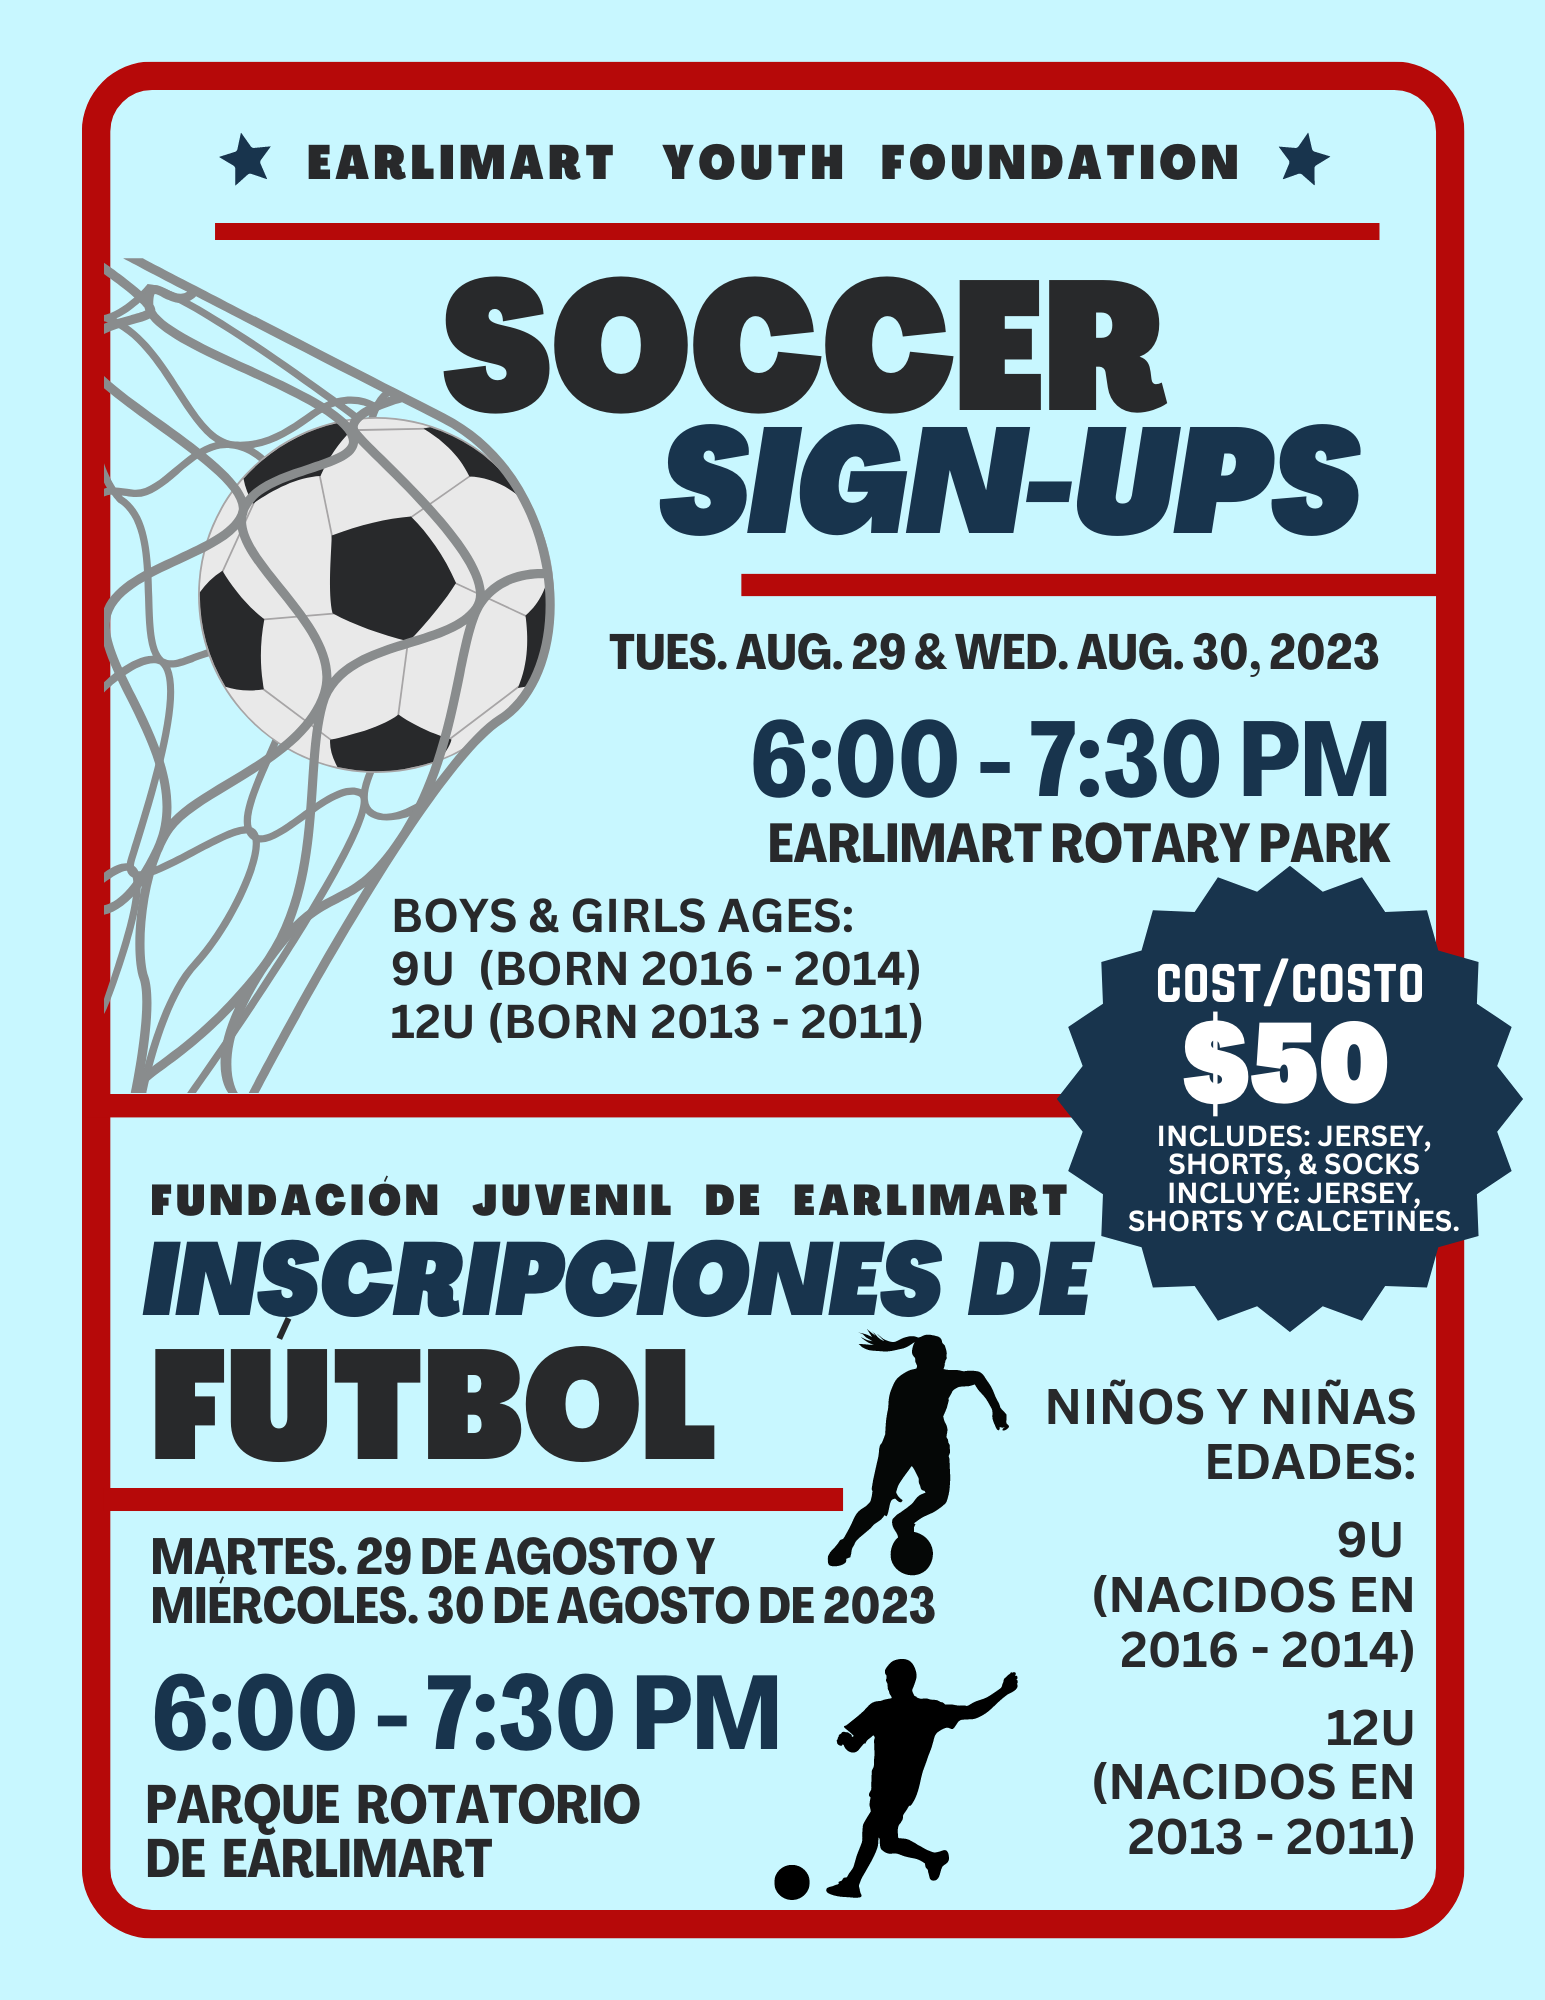 EYF Soccer sign-ups, soccer goal, net, and ball, EYF SOCCER SIGN-UPS  FOR BOYS AND GIRLS BORN BETWEEN 2016 - 2014 AND  BOYS AND GIRLS BORN BETWEEN 2013 - 2011 SIGN-UPS WILL BE AT EARLIMART ROTARY PARK ON TUESDAY, AUG. 29, AND WEDNESDAY, AUG. 30 FROM 6:00 TO 6:30 P.M.  THE COST IS $50 AND INCLUDES A TEAM SHIRT, SHORTS, AND SOCKS. , shadow of boy and girl with soccer ball